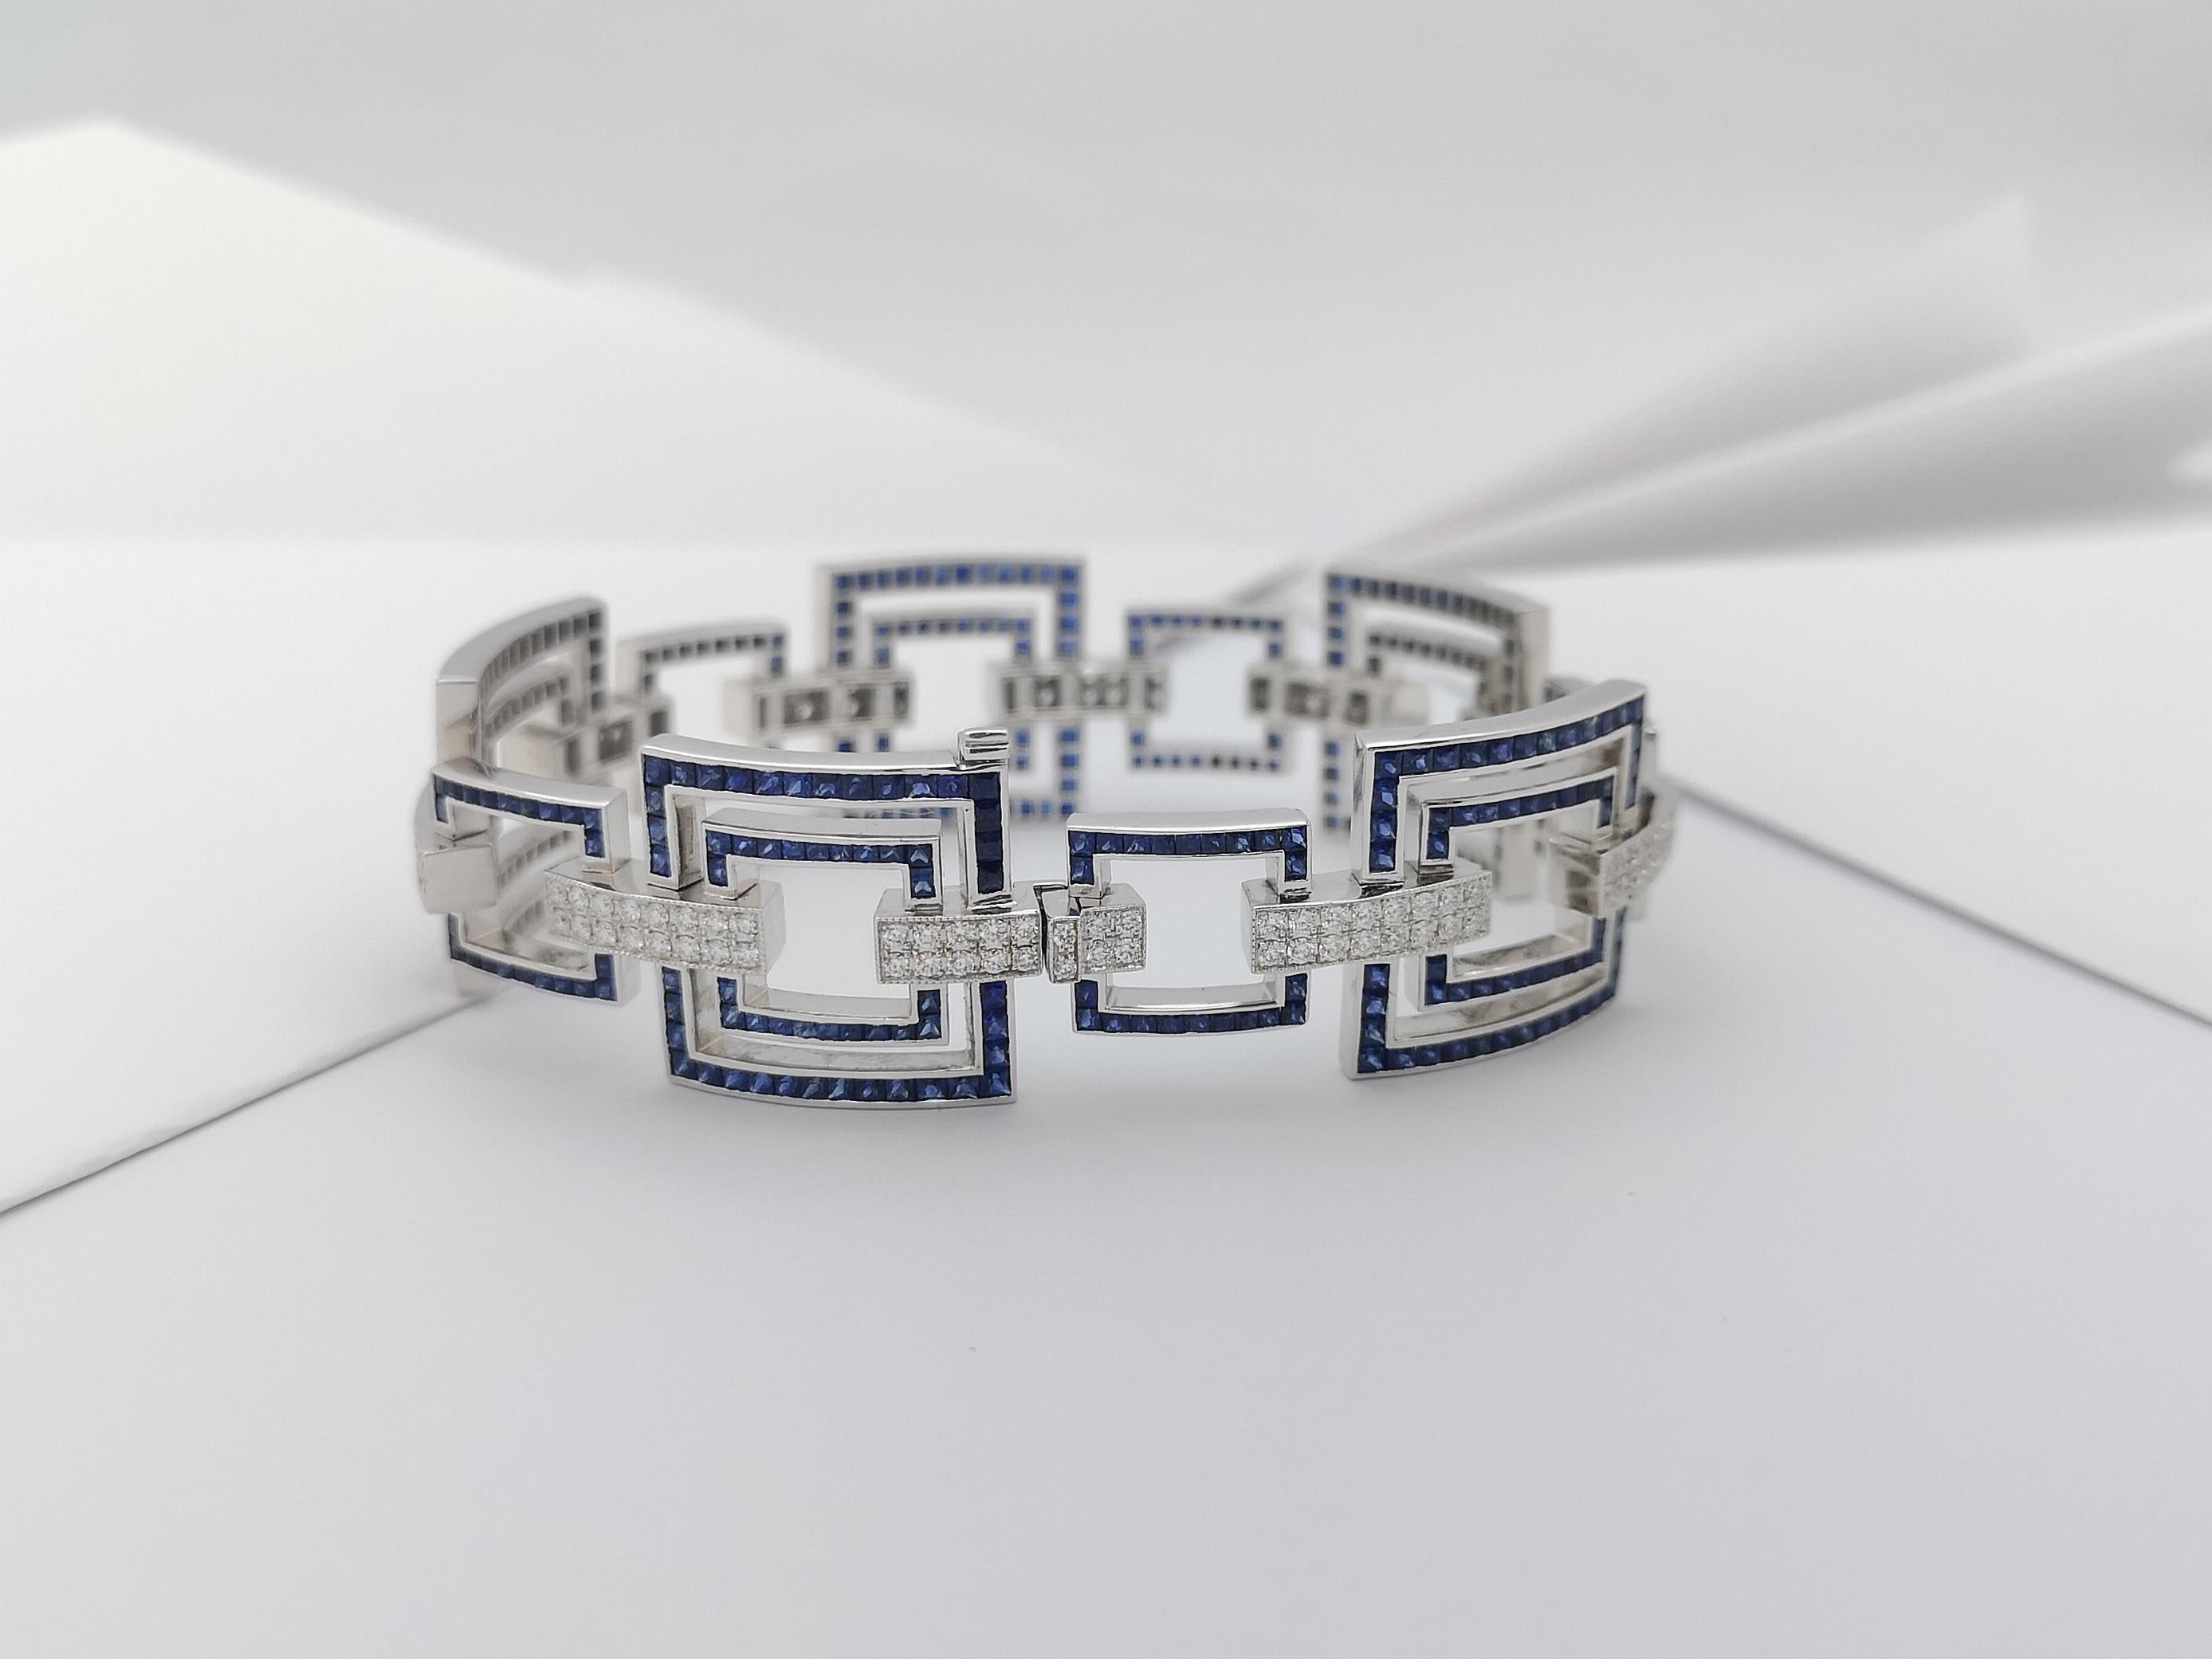 Blue Sapphire 13.43 Cts with Diamond 2.13 Cts Bracelet in 18k White Gold Setting For Sale 2